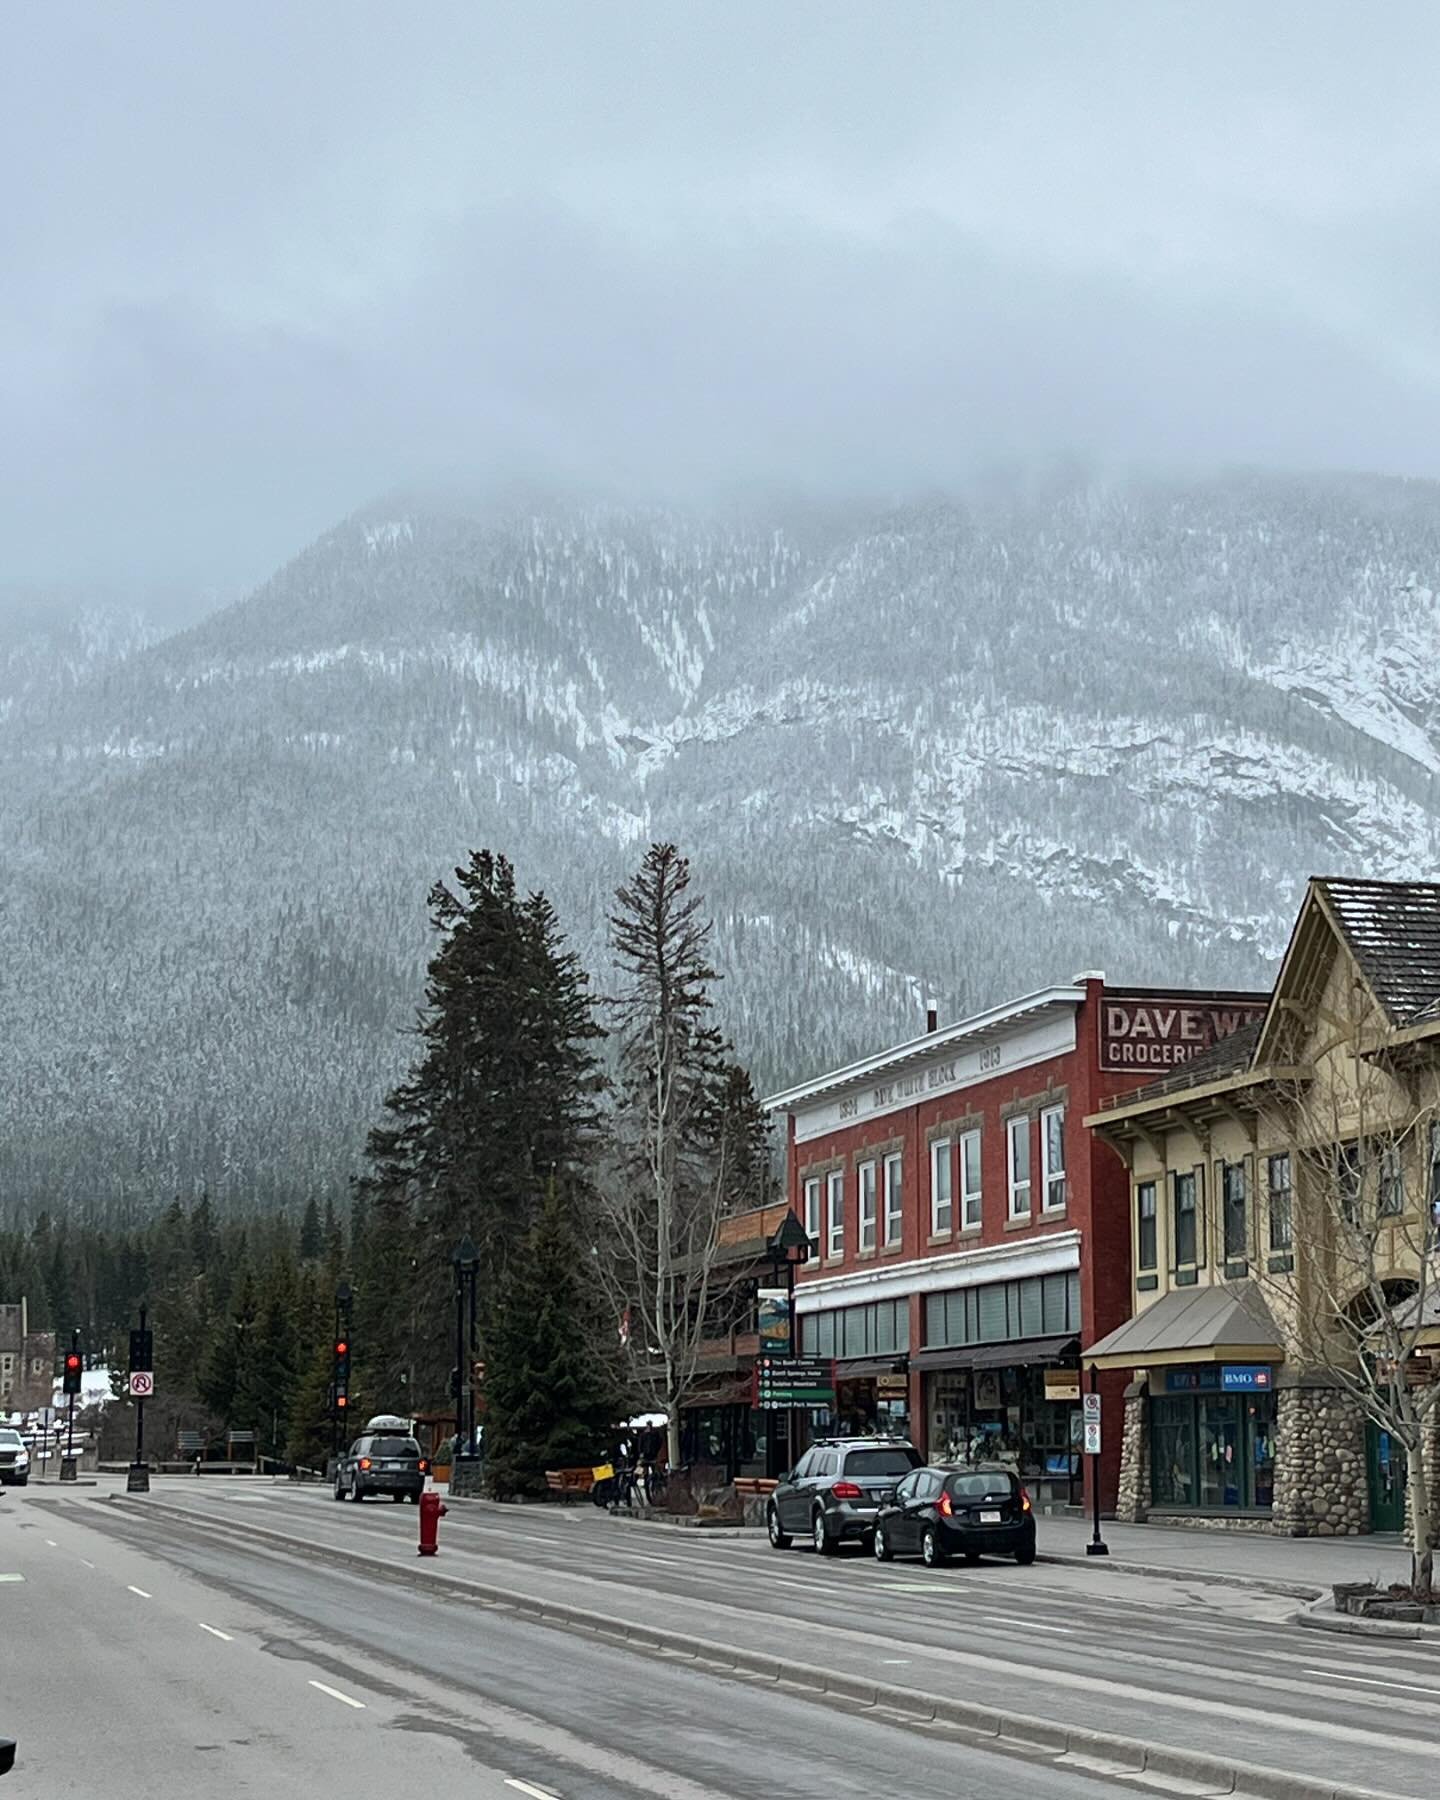 Market tour in Banff - if only spring had arrived here!🥶❄️